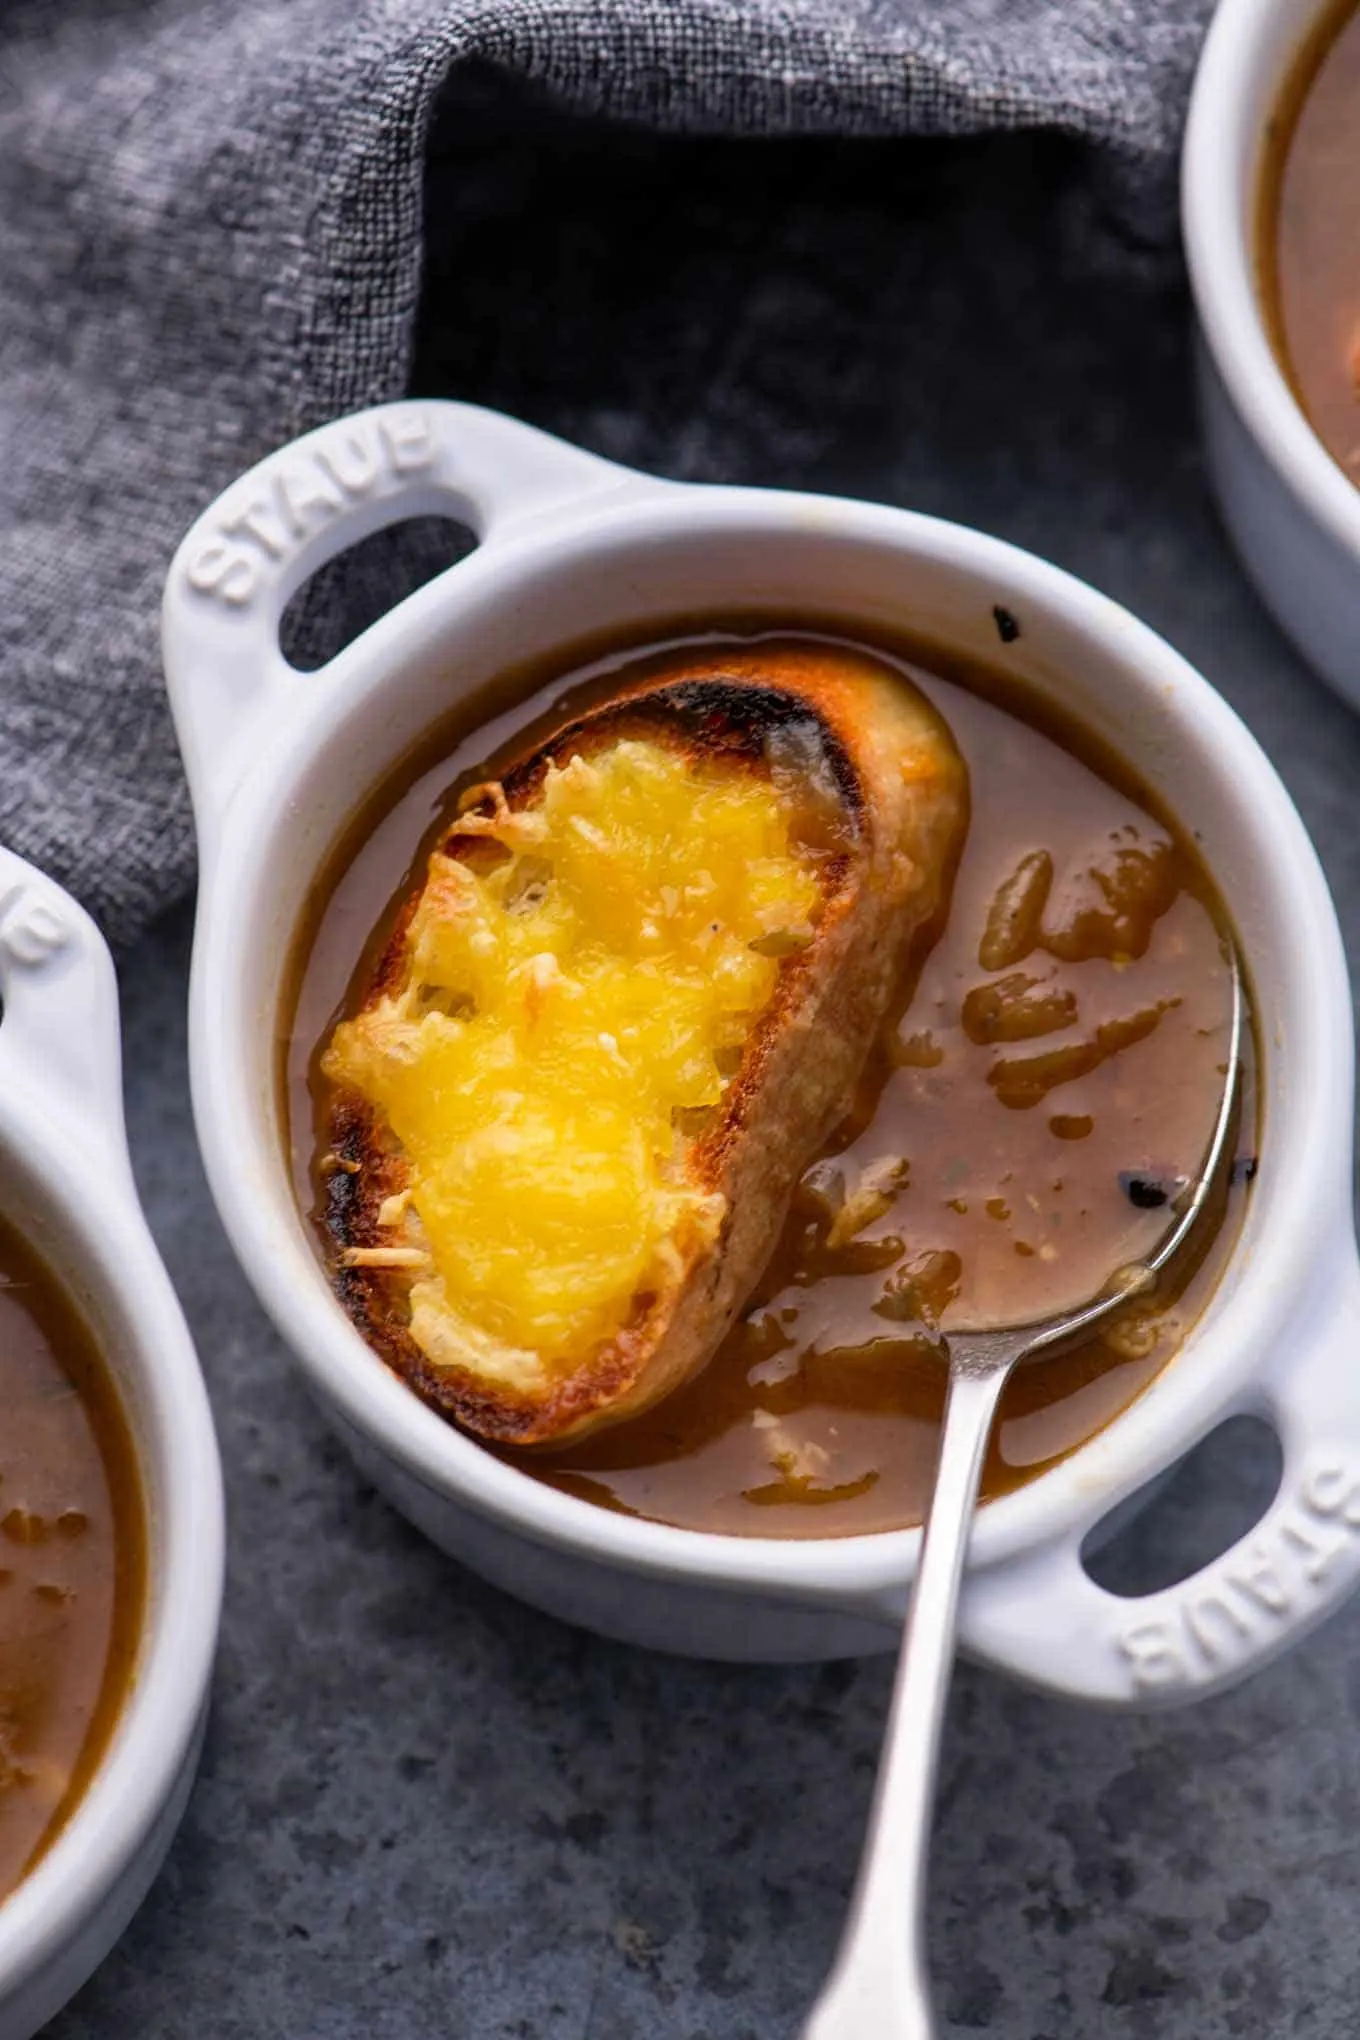 small bowl of soup with cheesy crouton on top and spoon lifting up soup